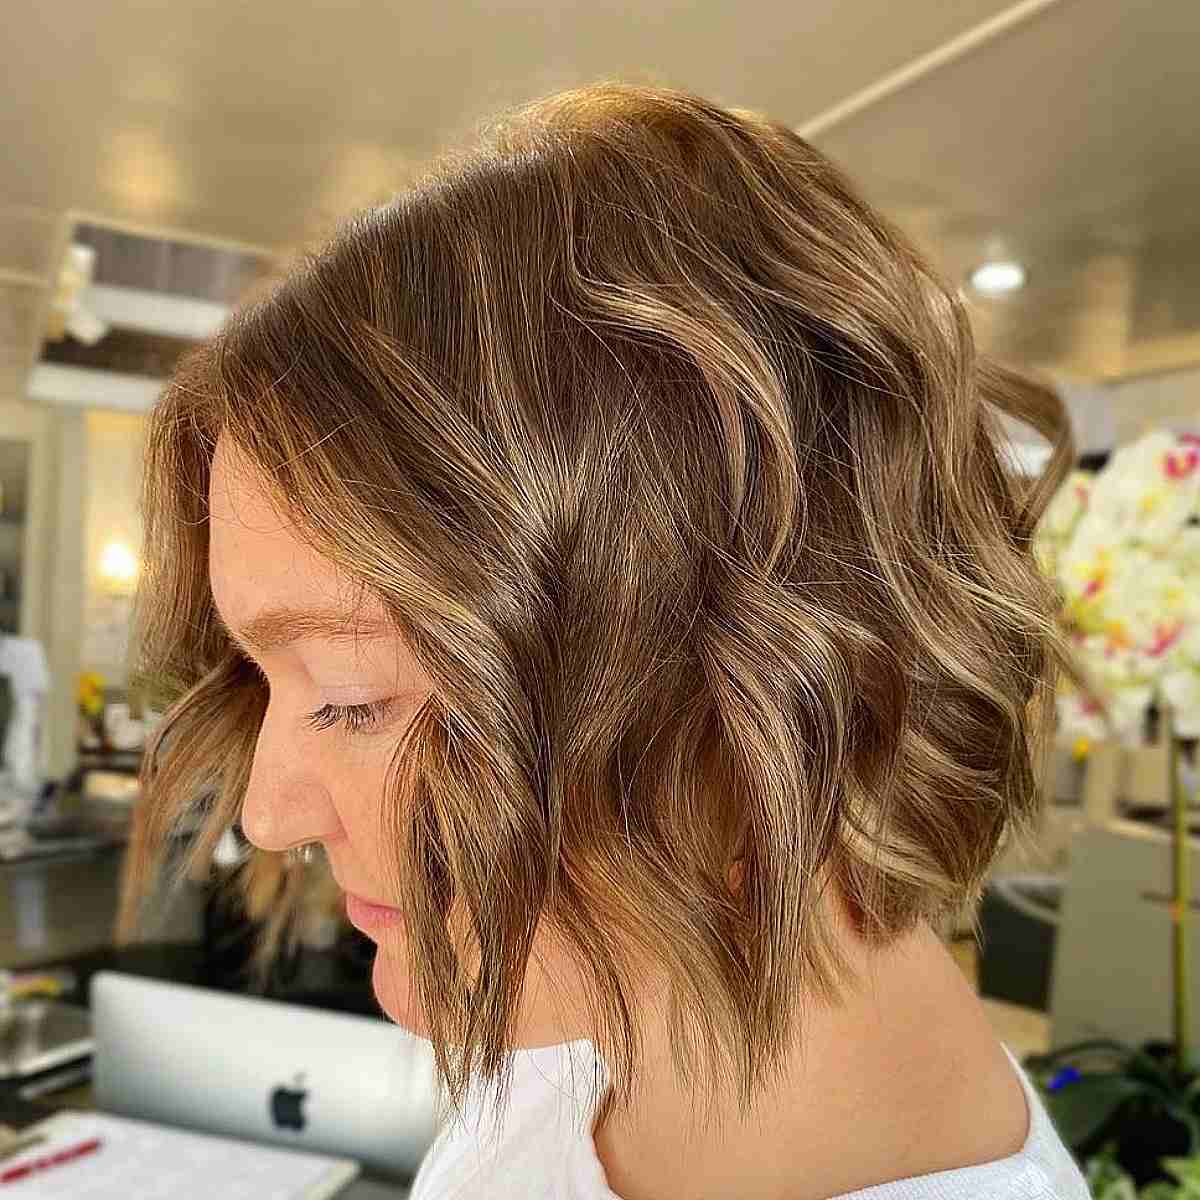 Chin-Length Thin Bobbed Hair with Soft Wavy Curls